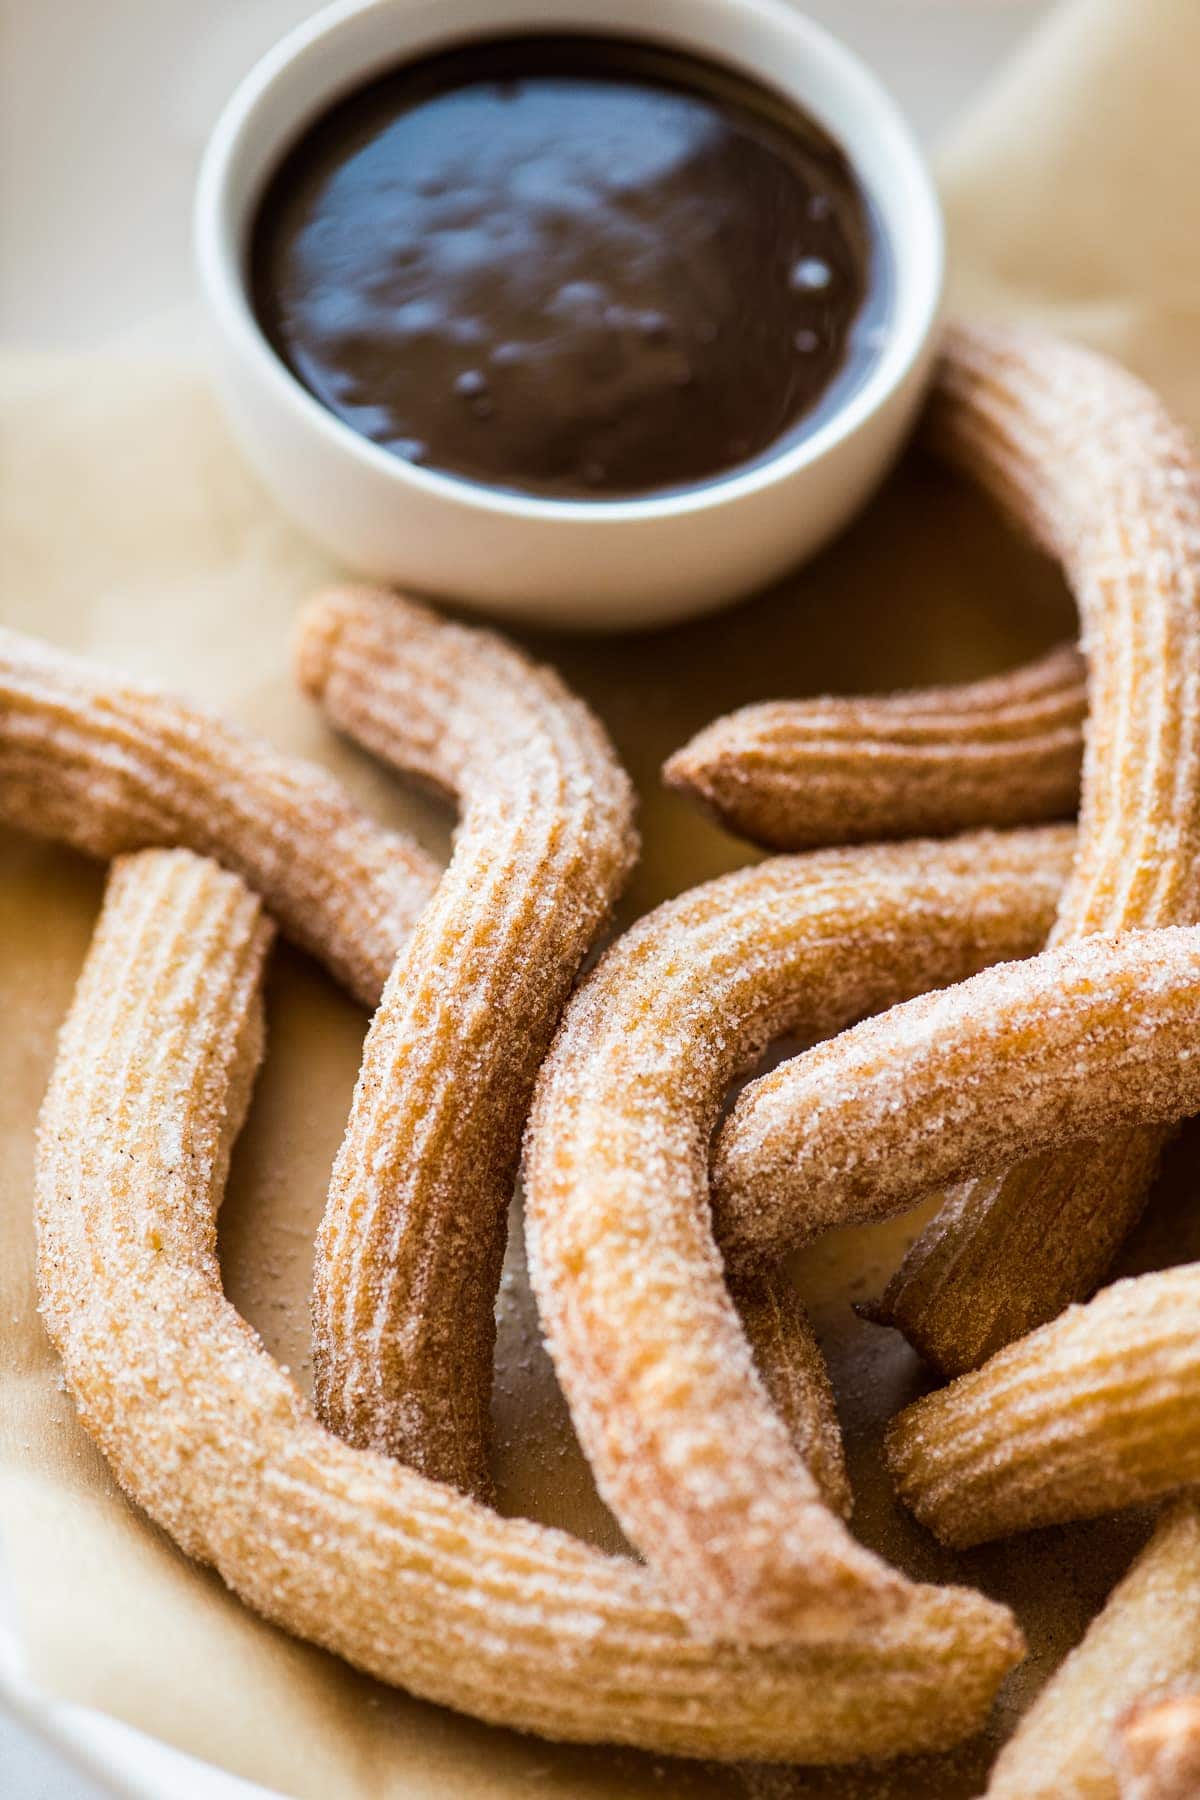 Churros coated with cinnamon sugar on a serving platter.